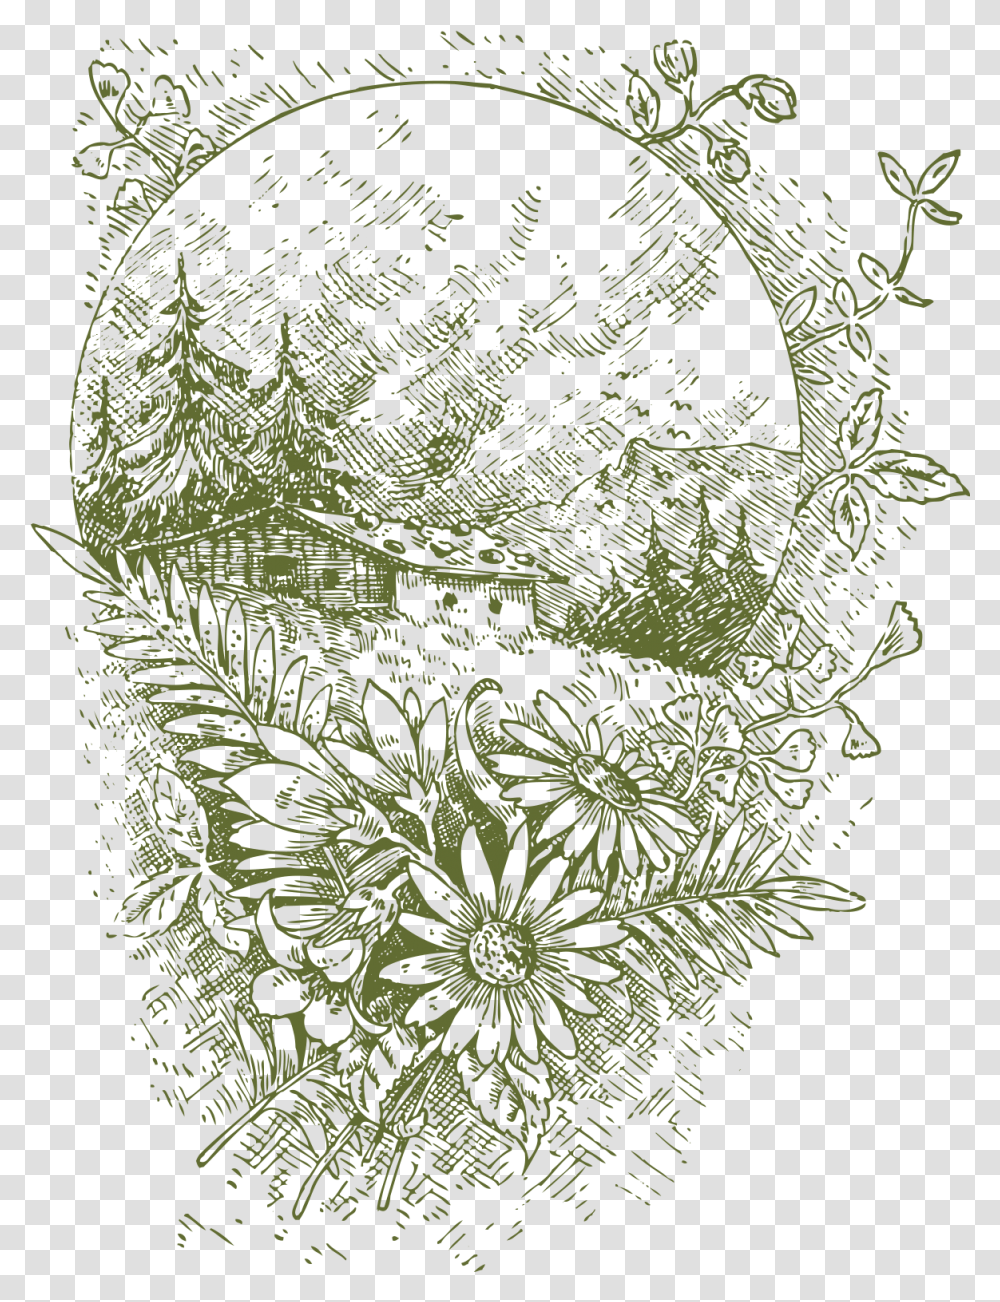 Drawn Floral Vector Vintage Free Clip Art Stock Flower Environment Drawing, Plant, Graphics, Text, Floral Design Transparent Png